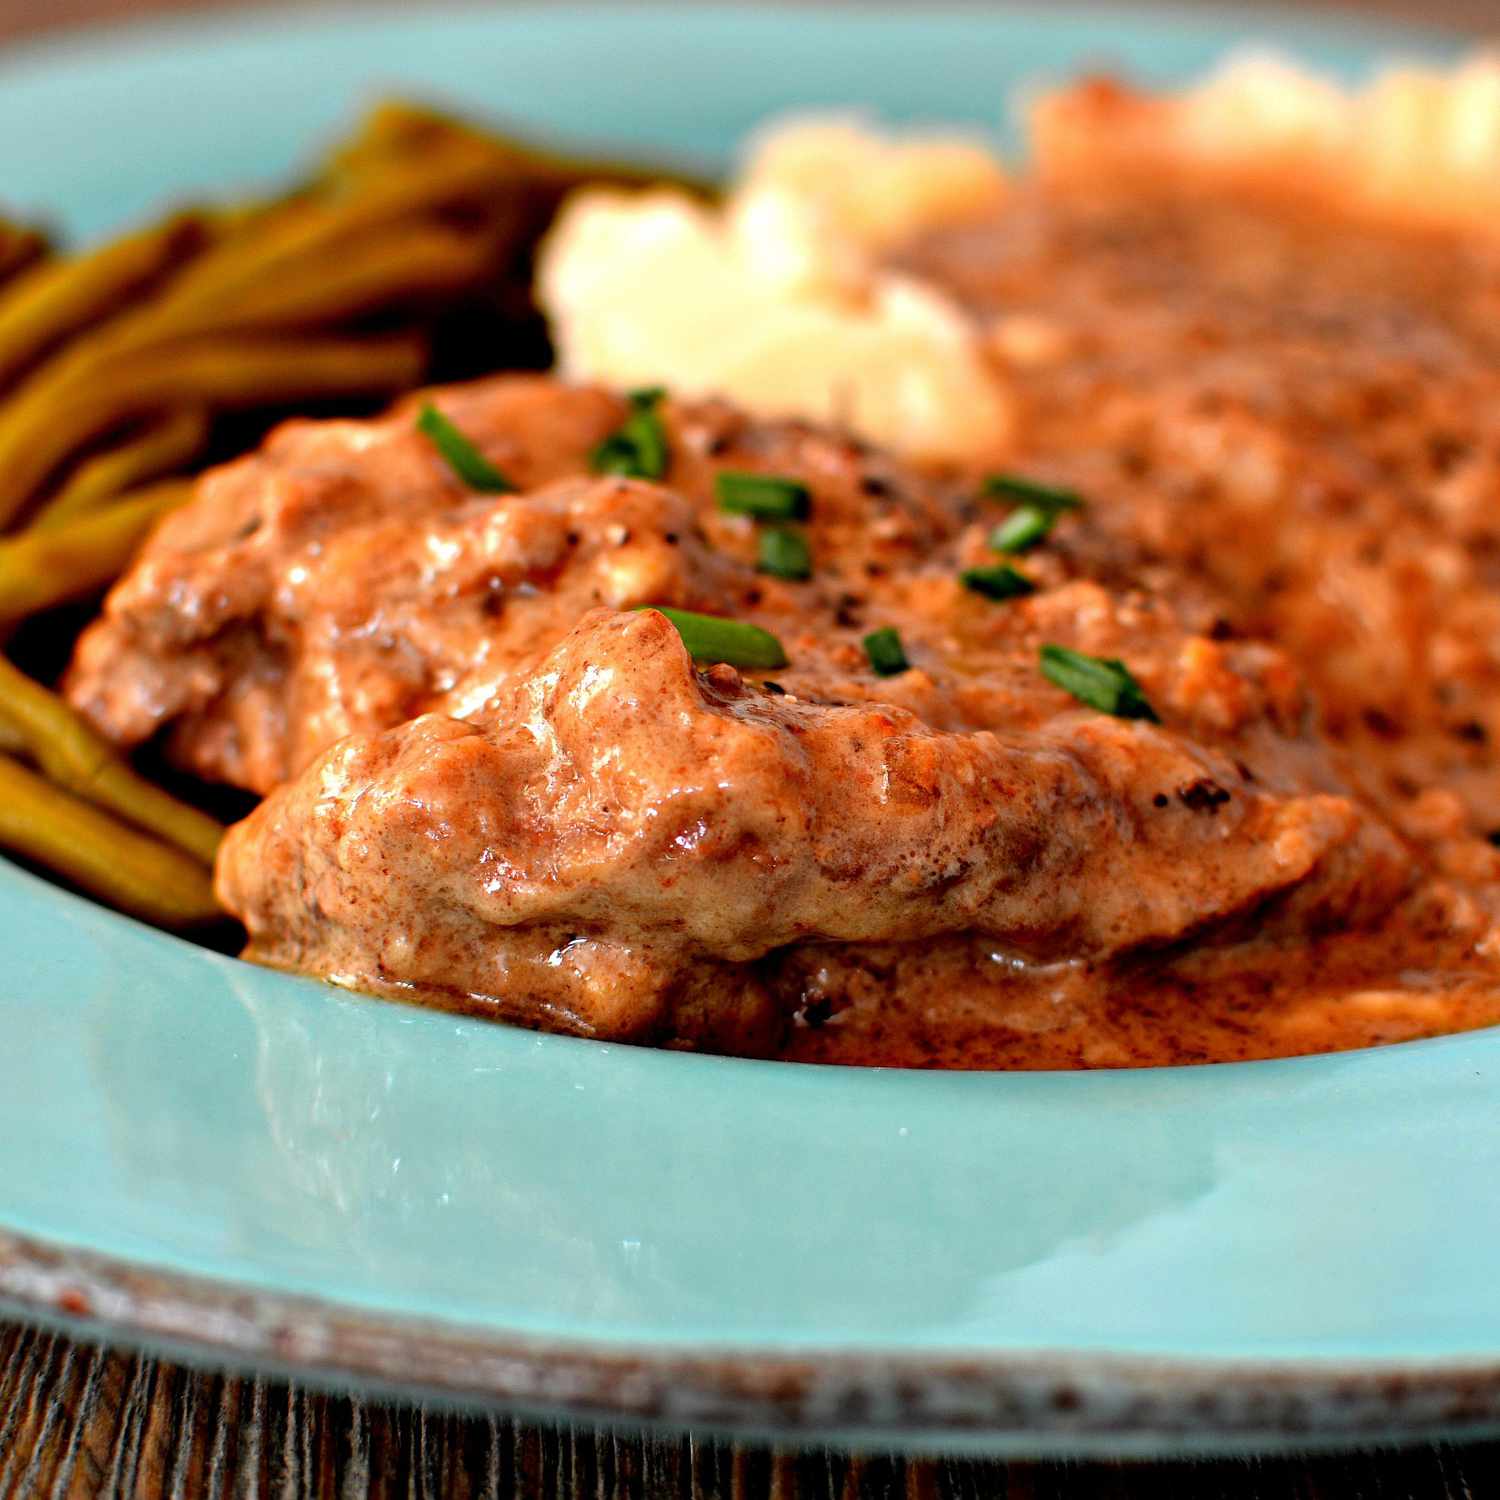 15 Best Round Steak Recipes for Budget- and Family-Friendly Meals